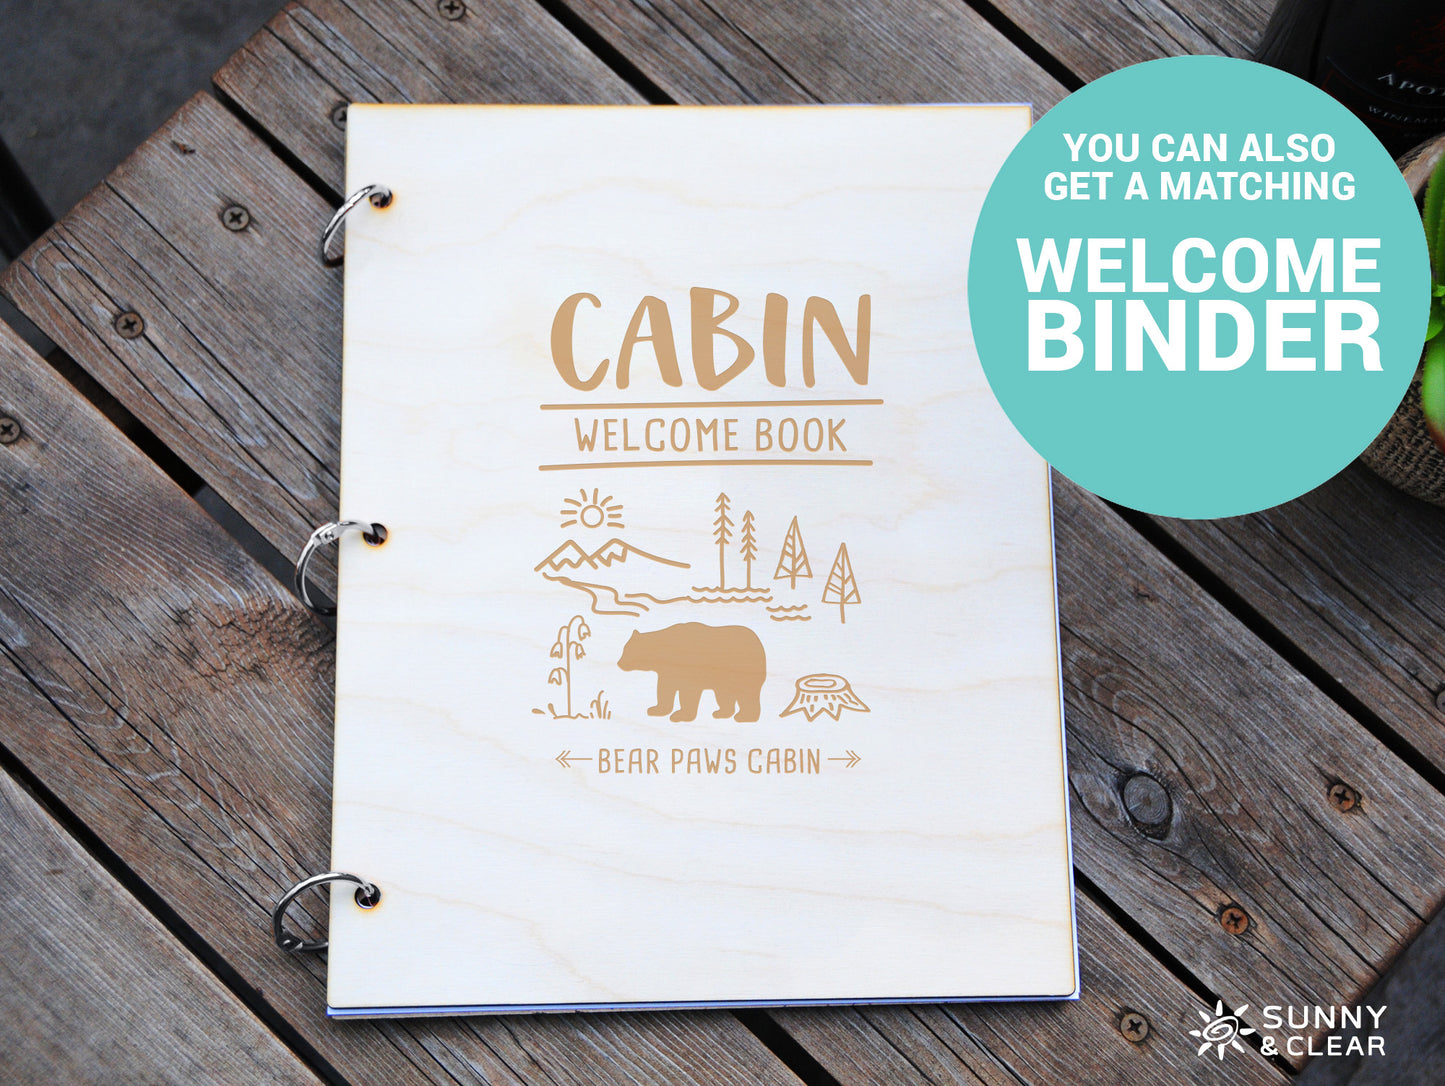 Cabin Guest Book, Bear Smoky Mountains, AirBNB, Laser Engraved, Personalized